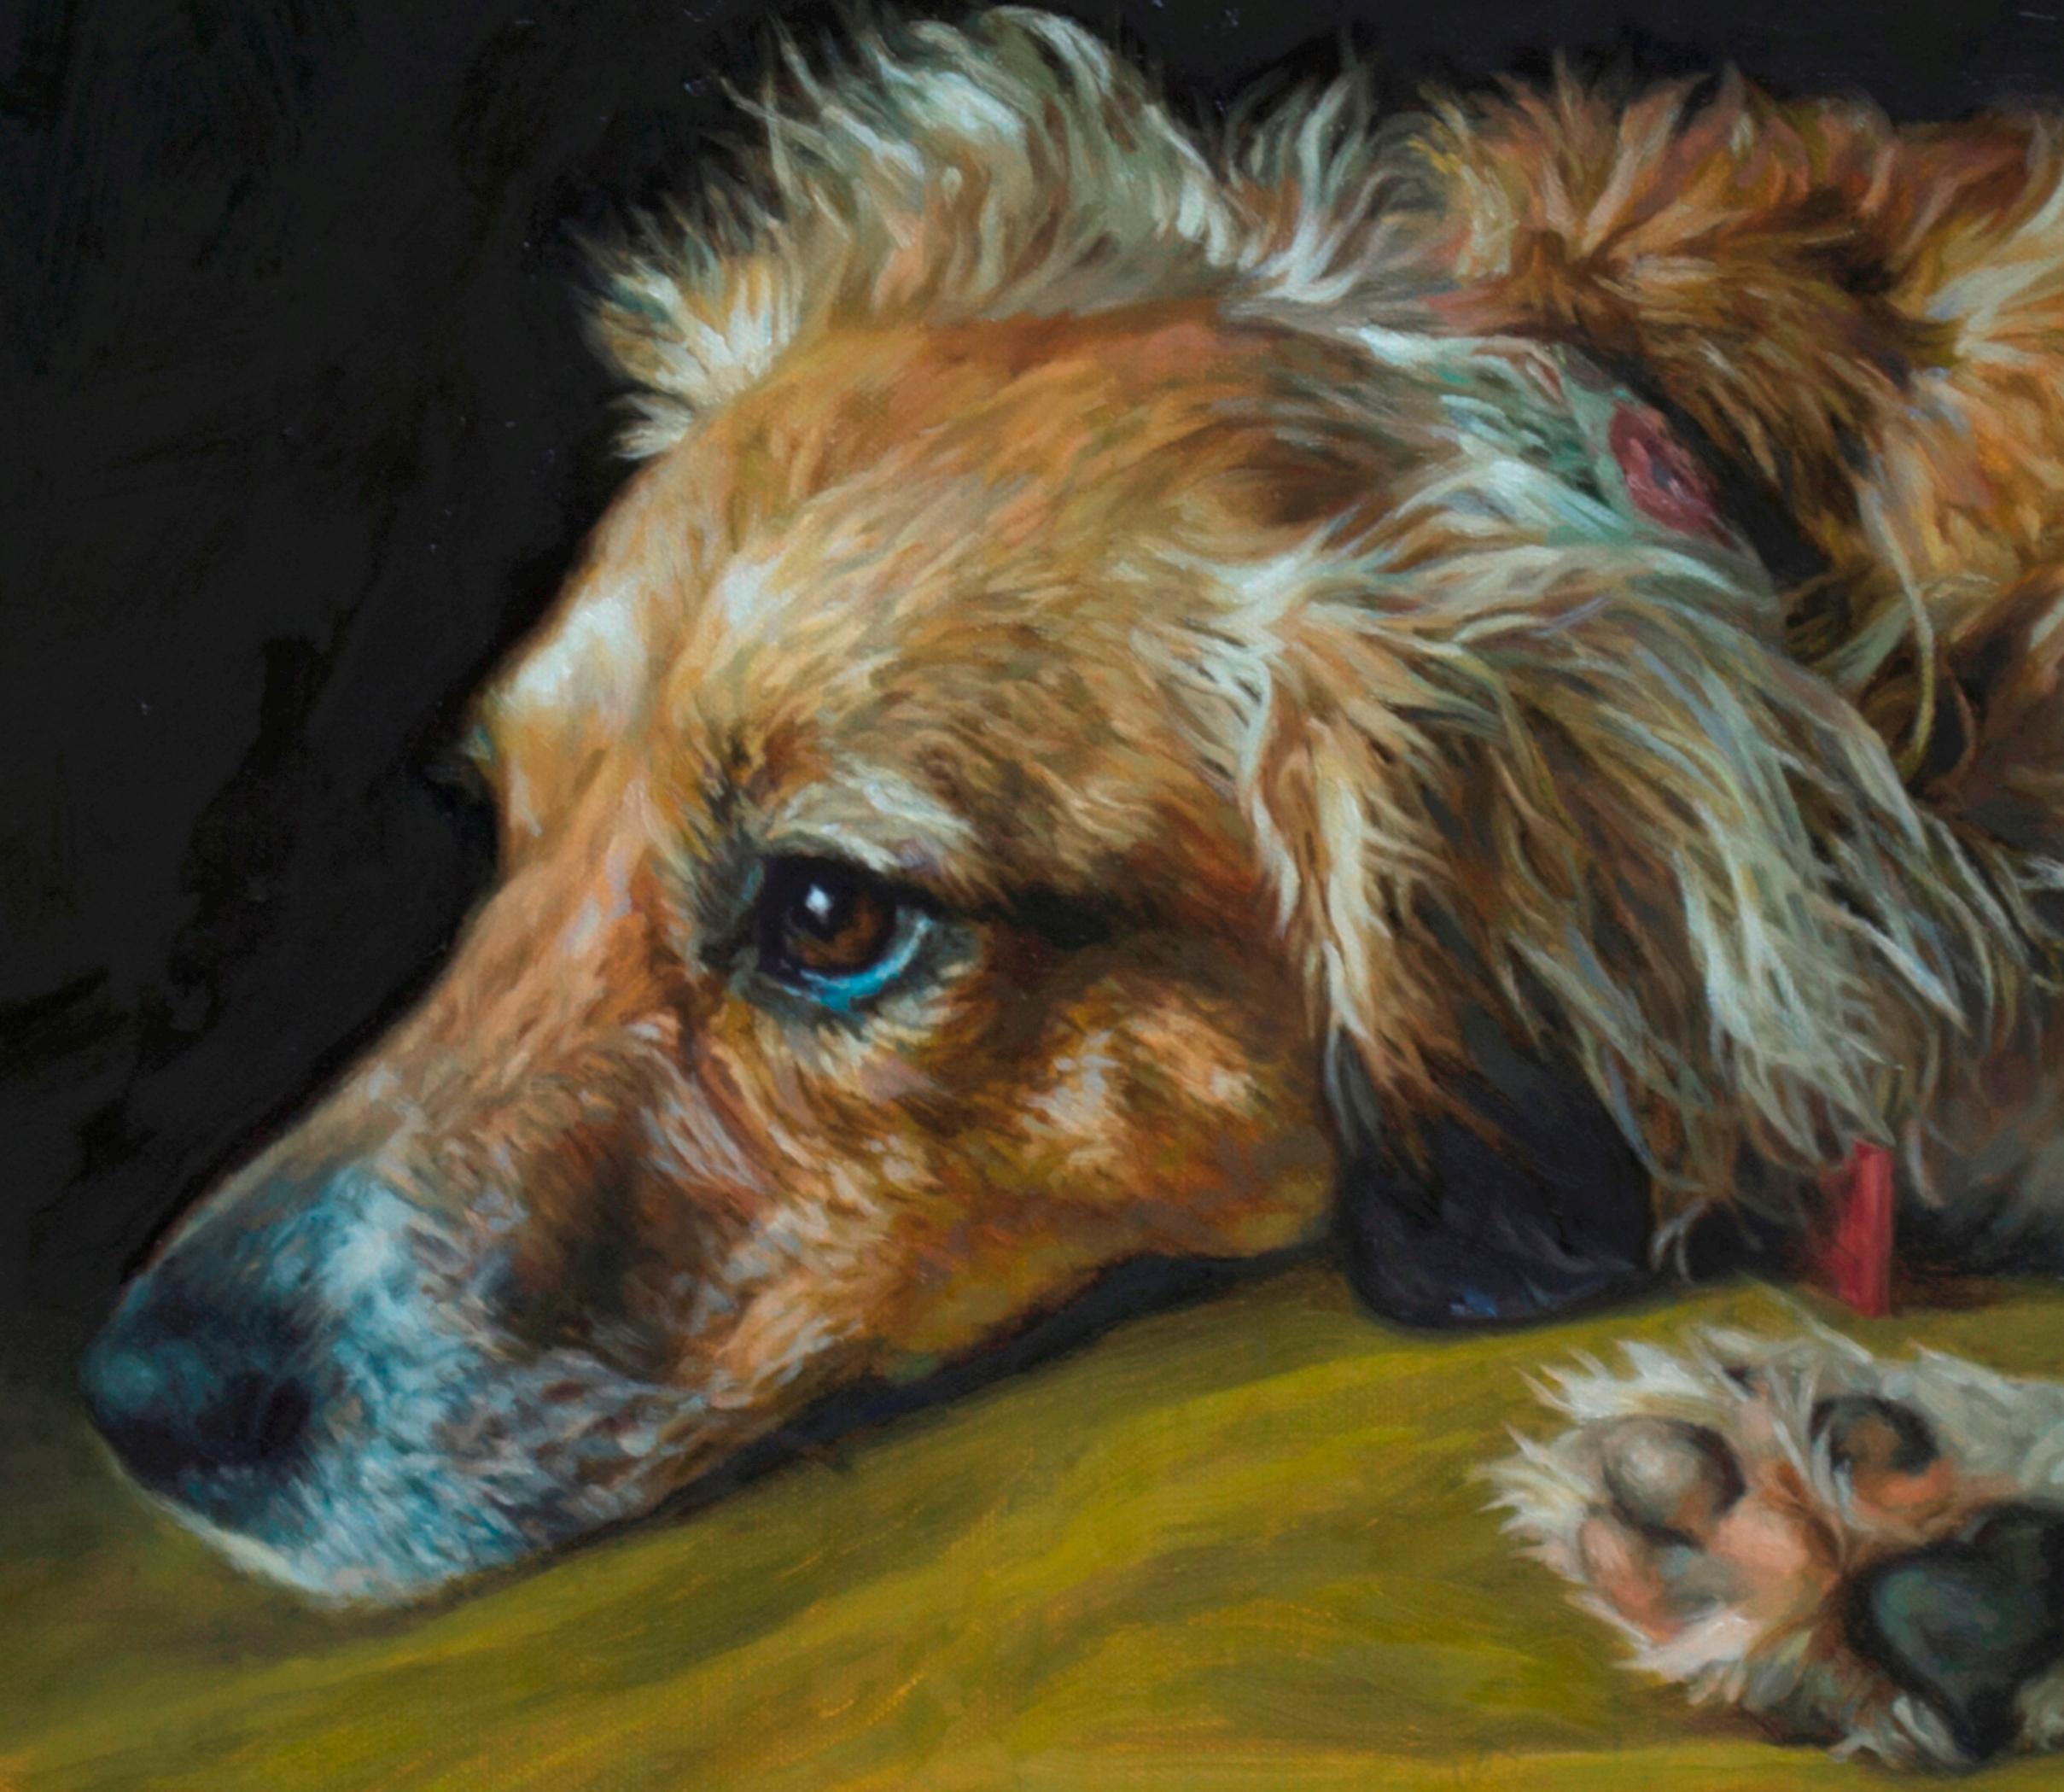 Pensive Penny, a long haired dachshund mix dog painting with exquisite detail - Painting by Catrina Monroe